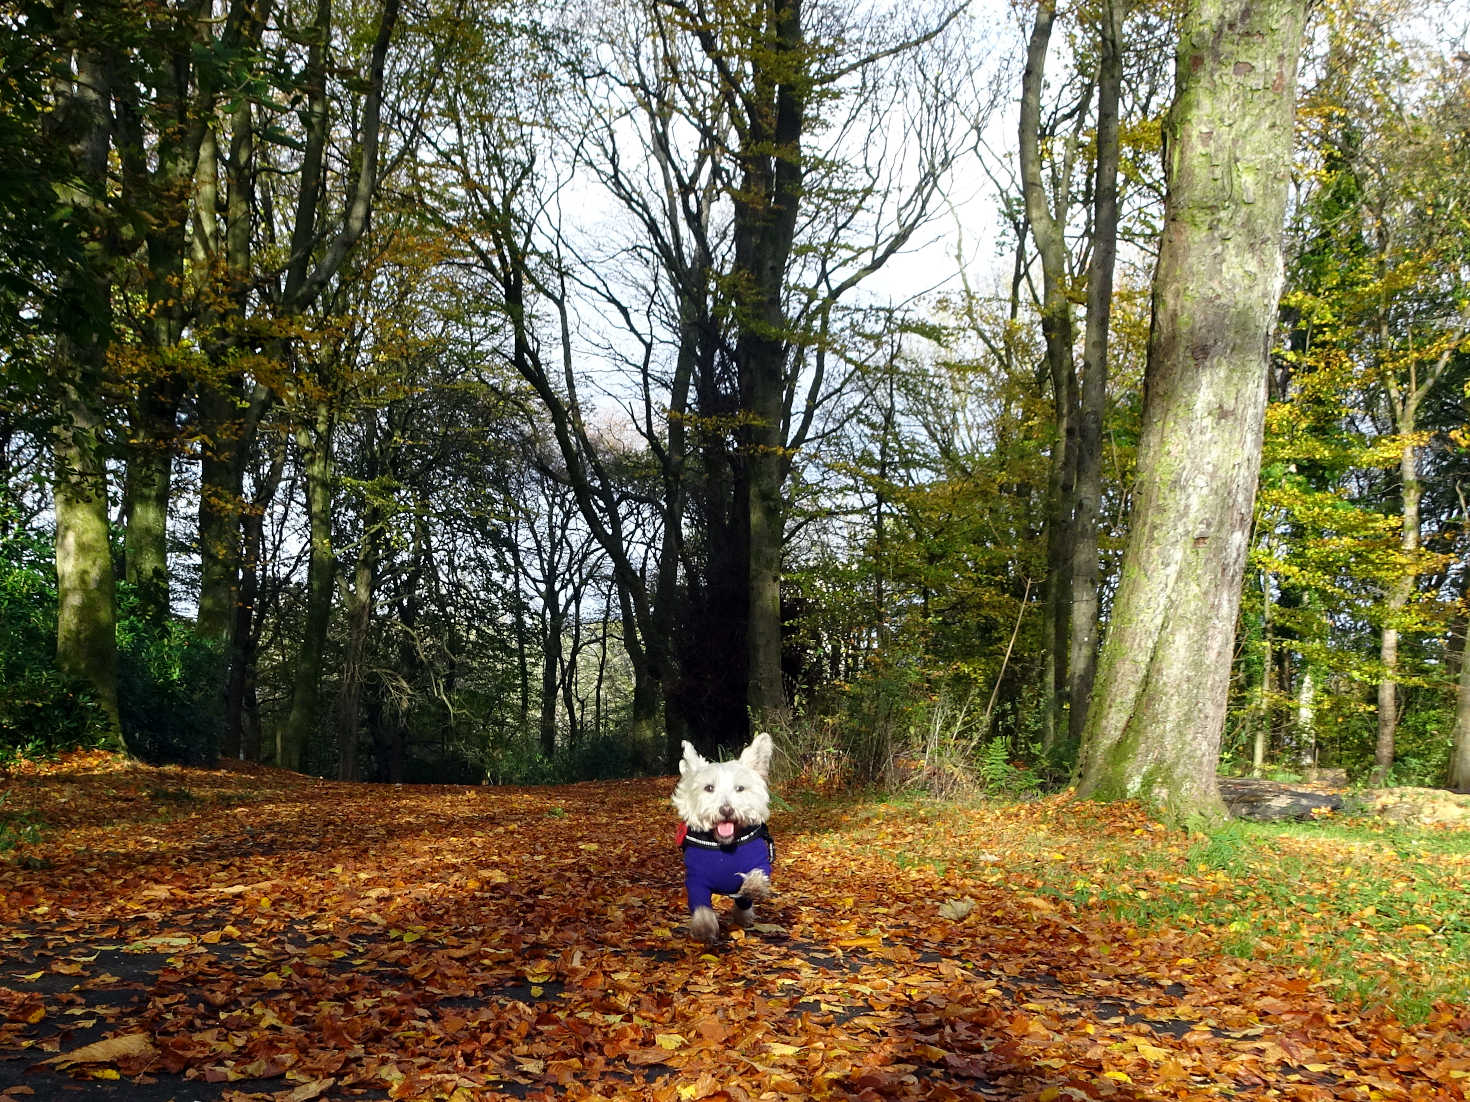 poppysocks playing in the autumn leaves